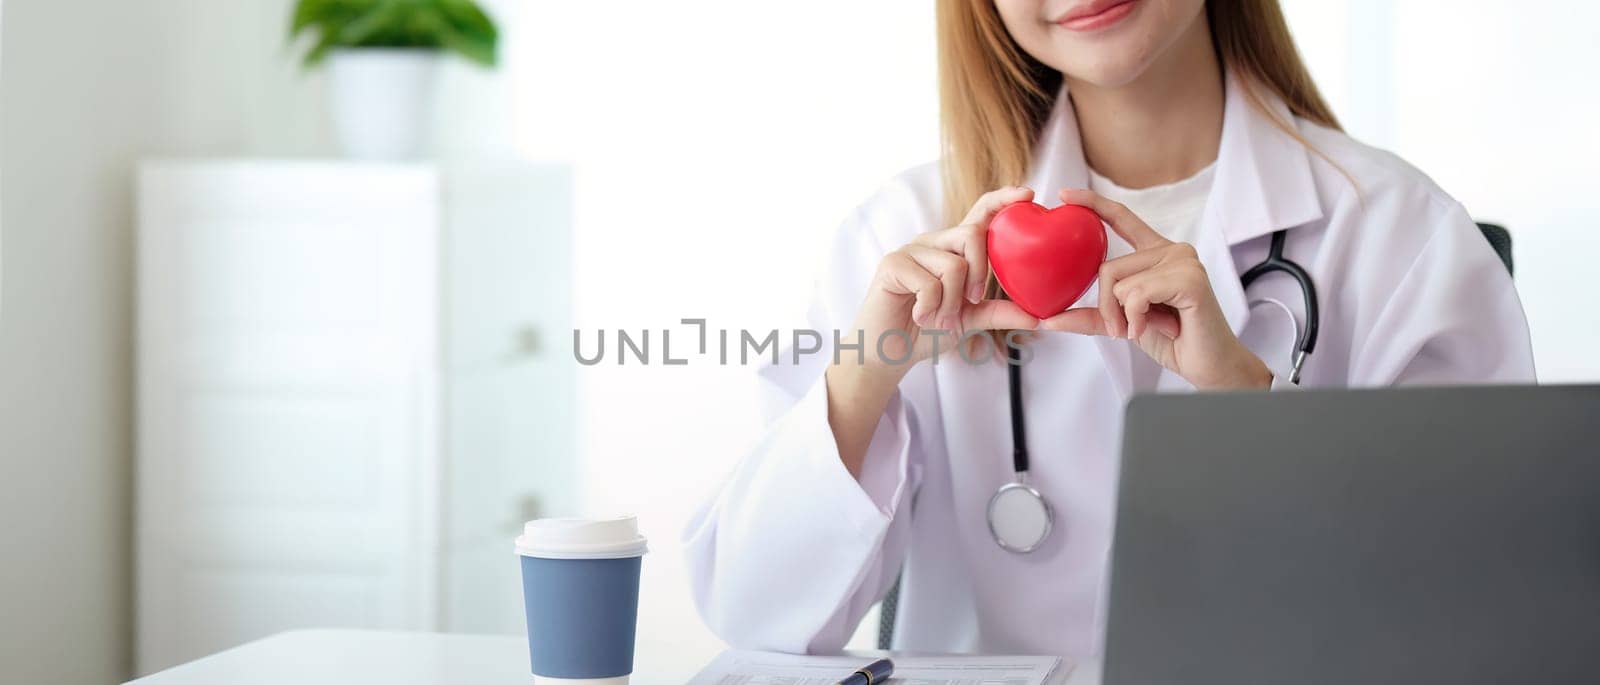 Happy young doctor woman holding red heart shape object, looking at camera with smile. Positive practitioner, cardiologist by nateemee